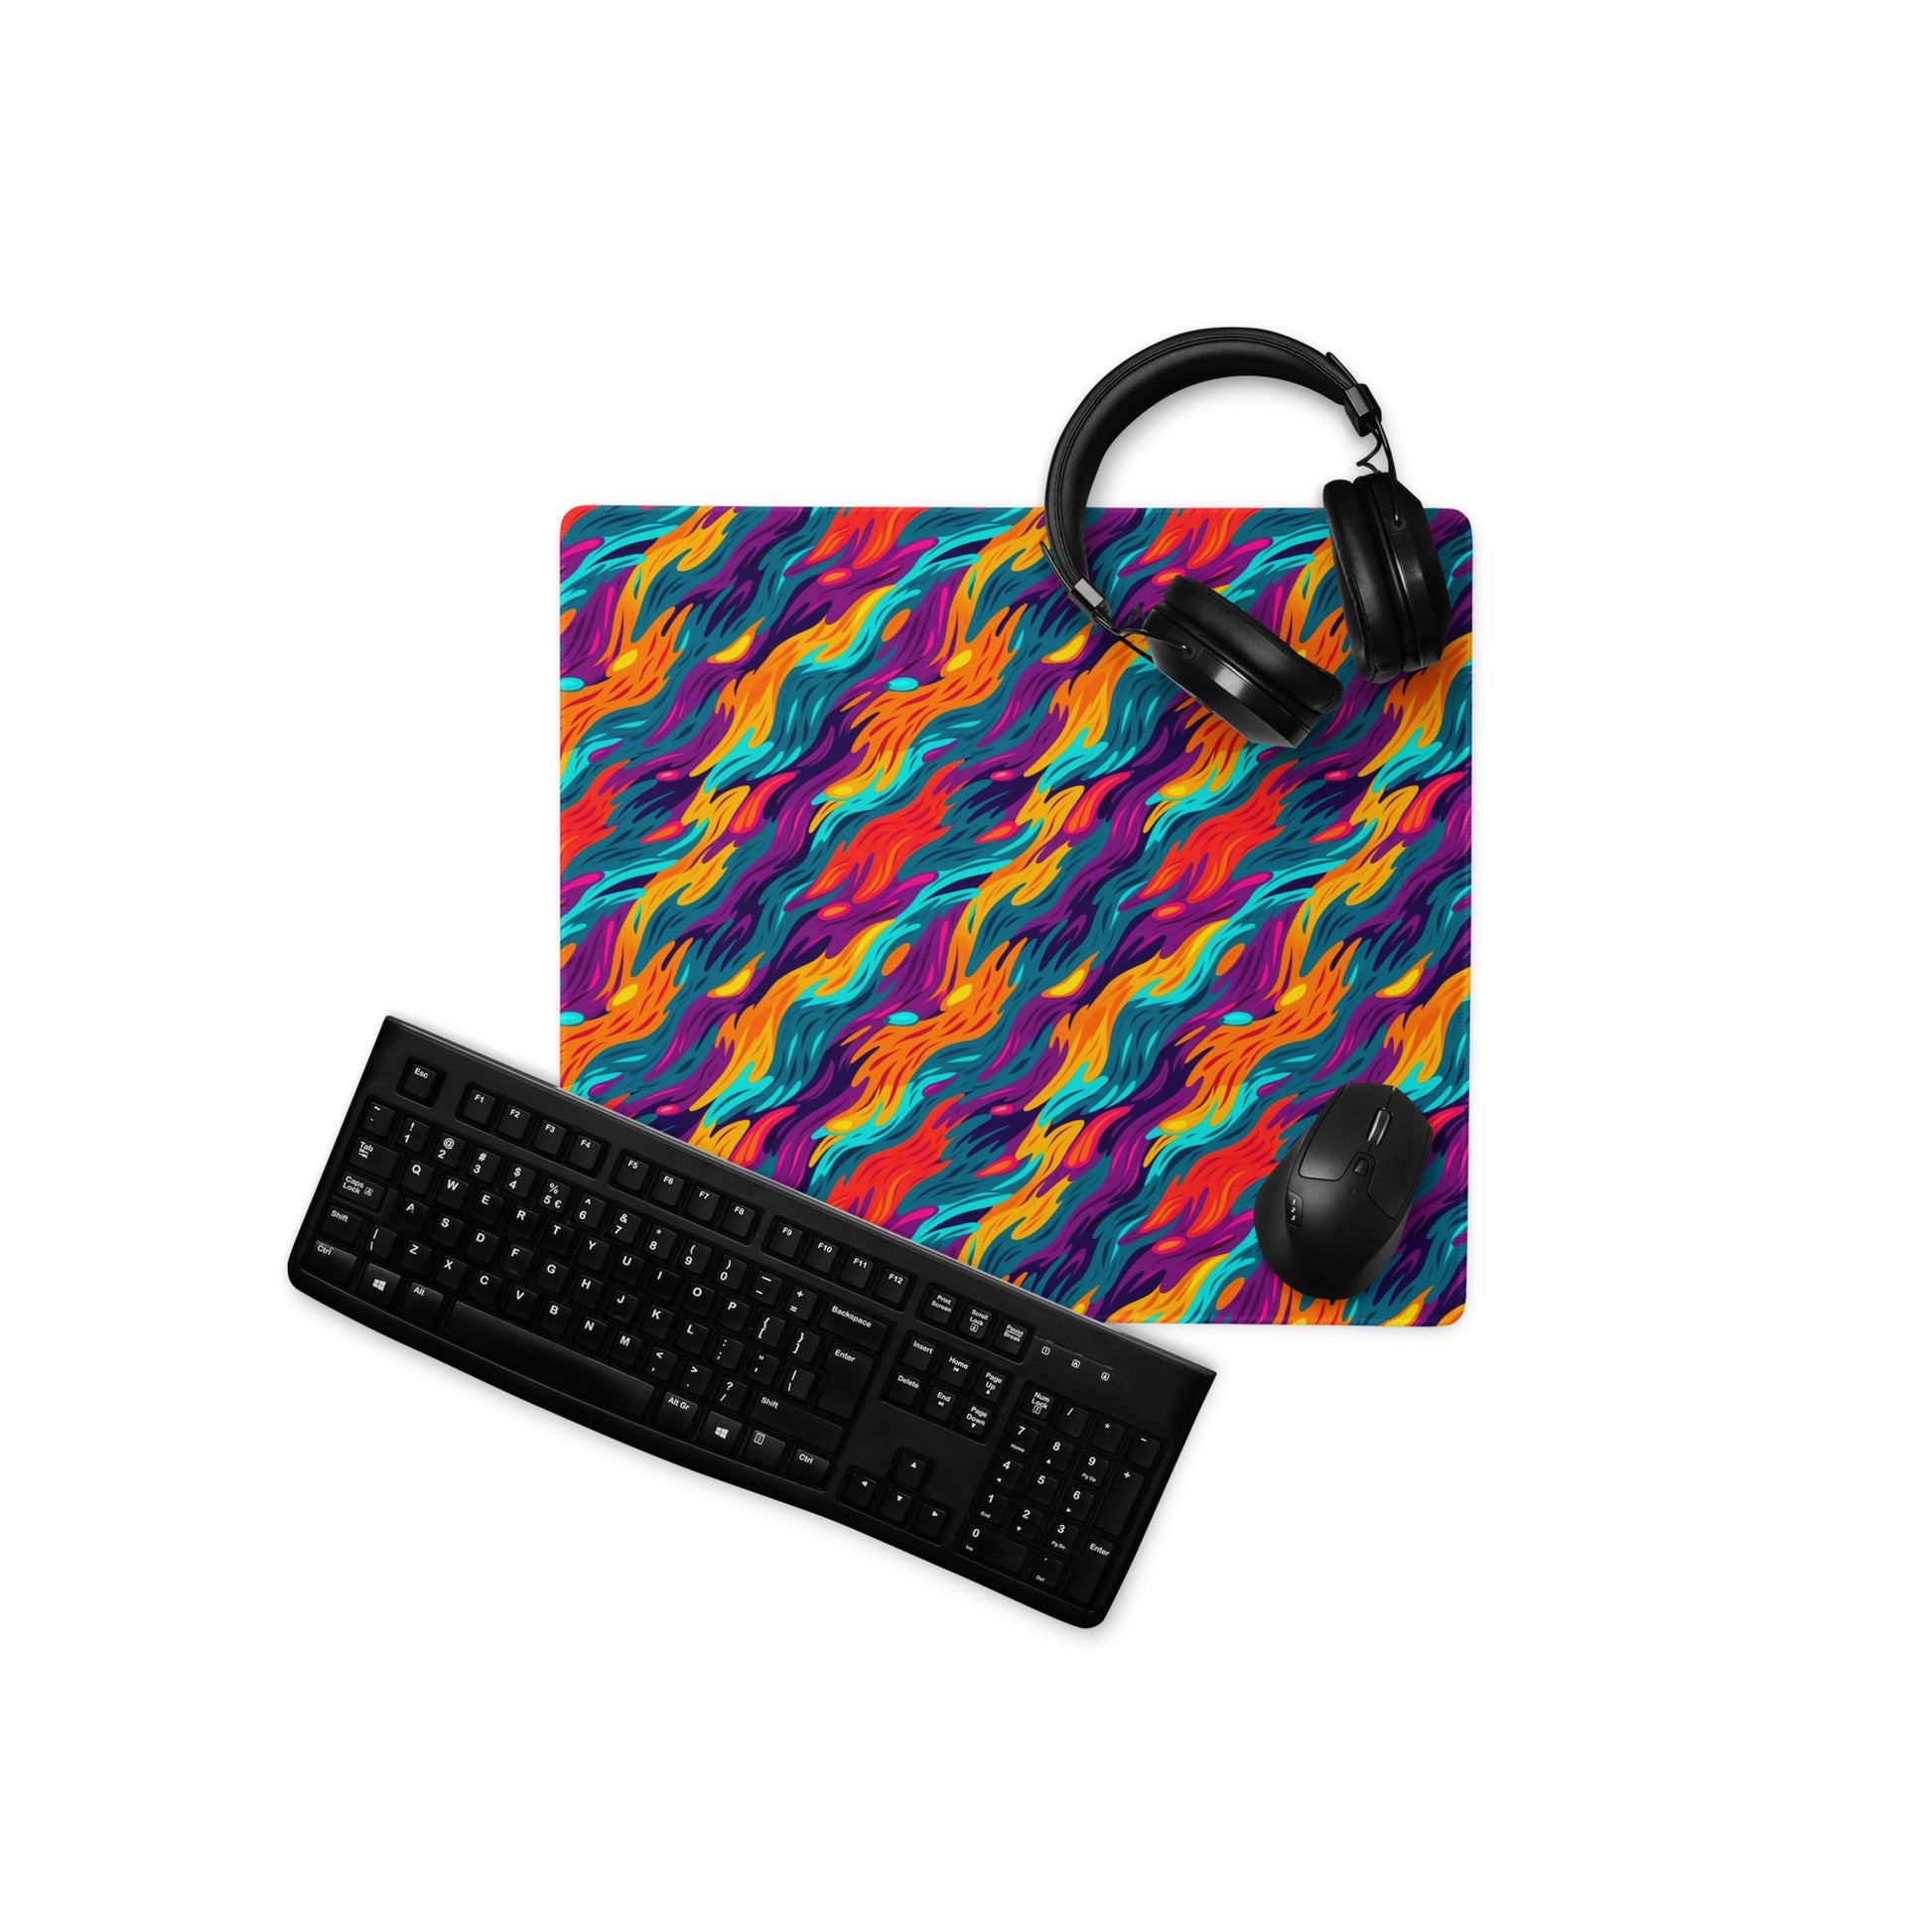 An 18" x 16" desk pad with a wavy flame pattern on it displayed with a keyboard, headphones and a mouse. Rainbow in color.